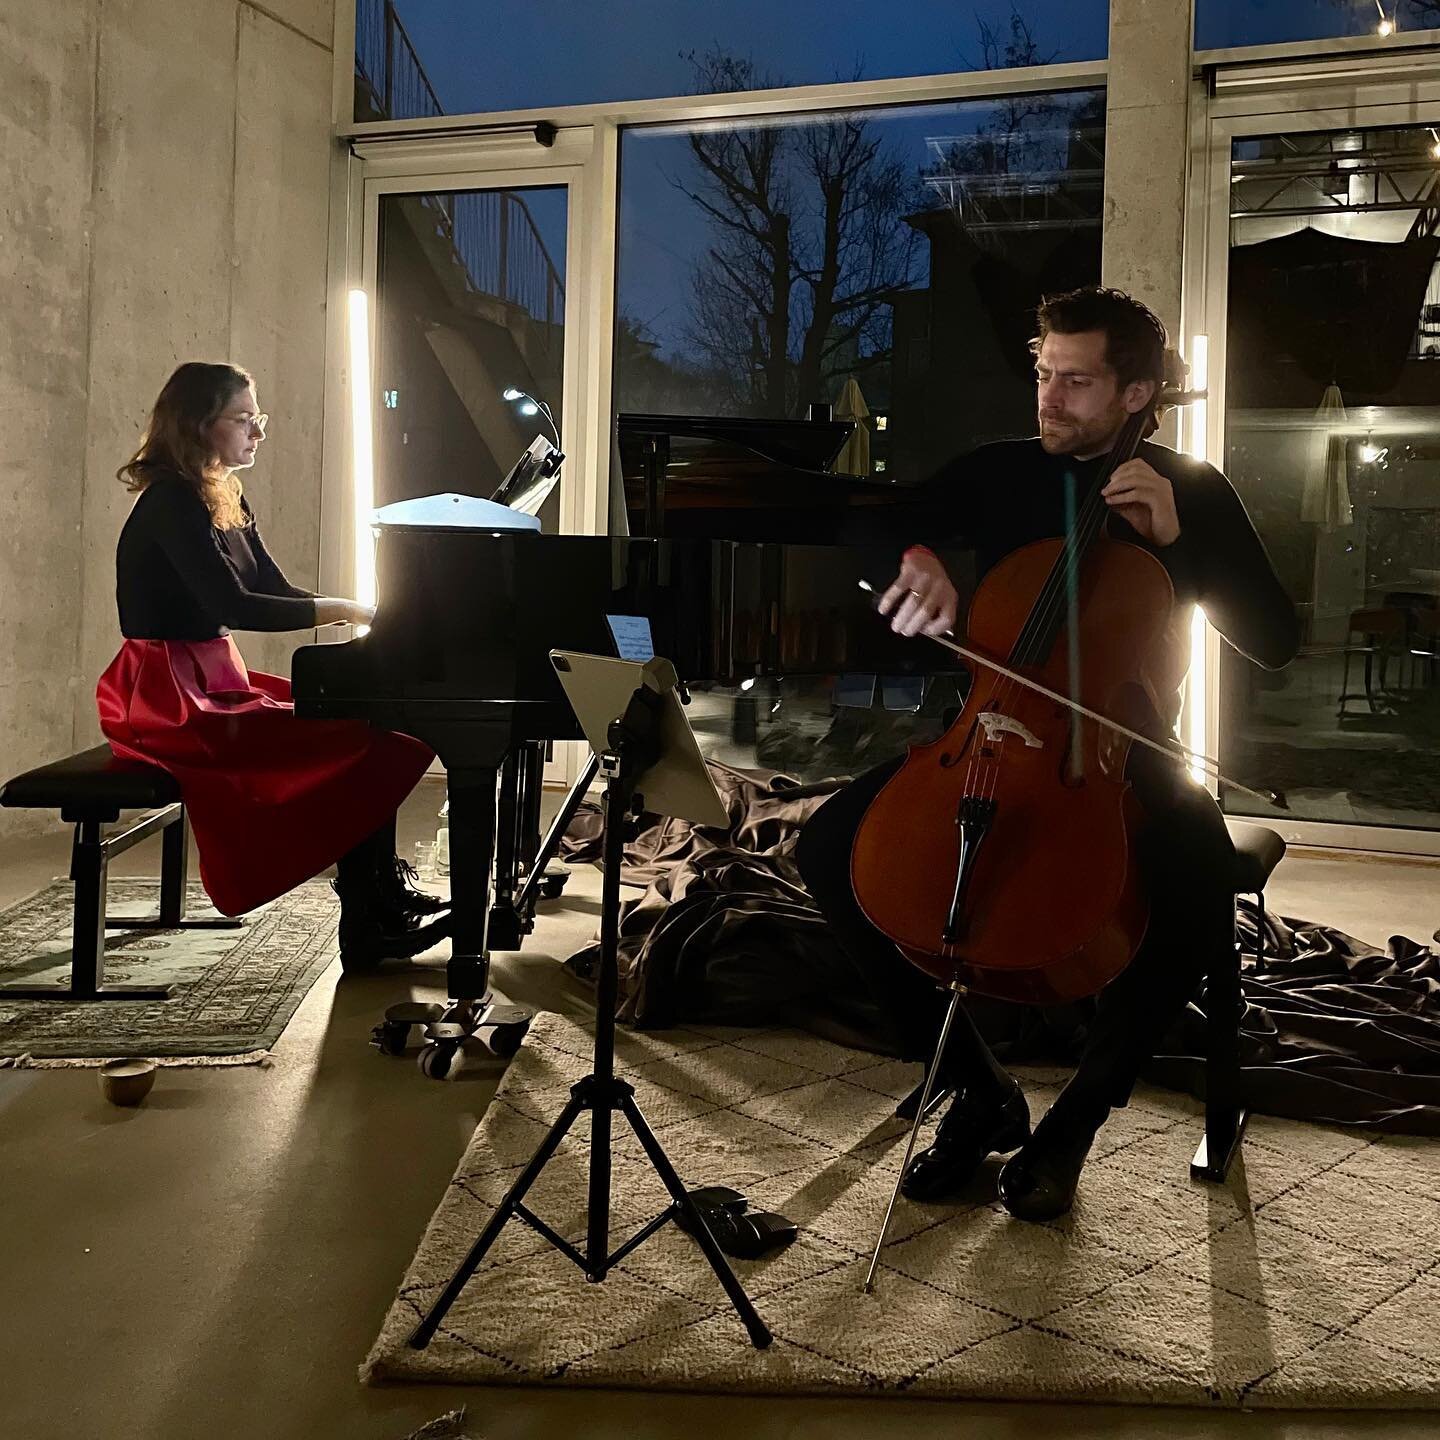 Friday's concert in my home town with @arthurhornig.cellist and a well beloved recital program and sold out audience. Thanks to @lobeblock and @pianosalon_christophori. ⠀
⠀
#duo #cello #piano #recital #berlin #placetobe #classicalmusic #style #newpla